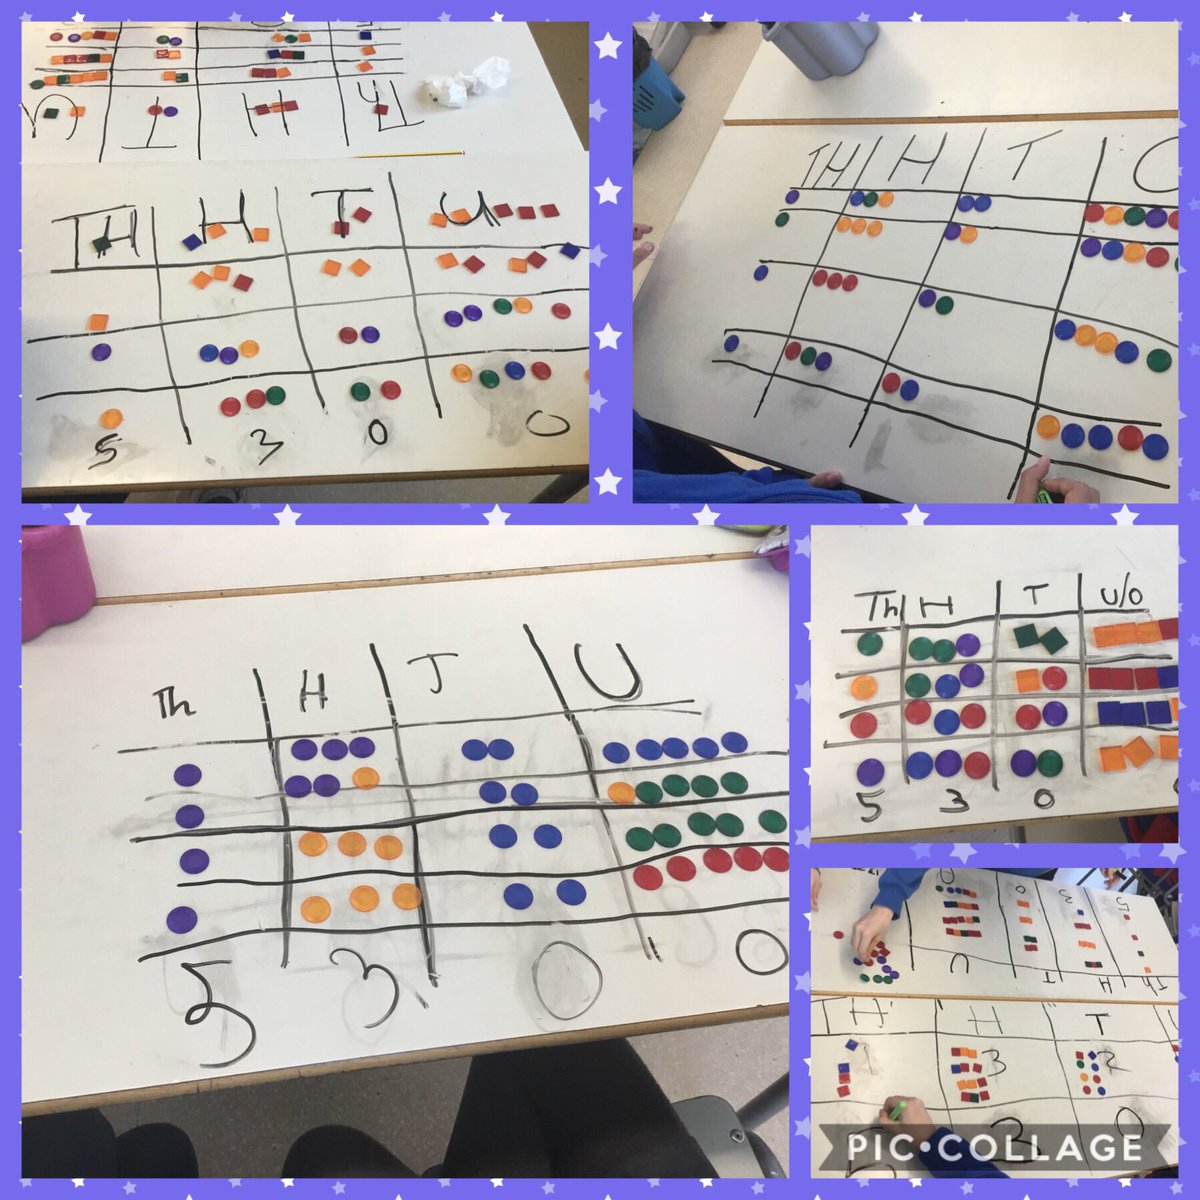 We used our tables to make giant place value grids today! A way to help understand the mechanics of multiplying large numbers. #Y5DRAGONS #makingmathsfun @BSB_Barcelona